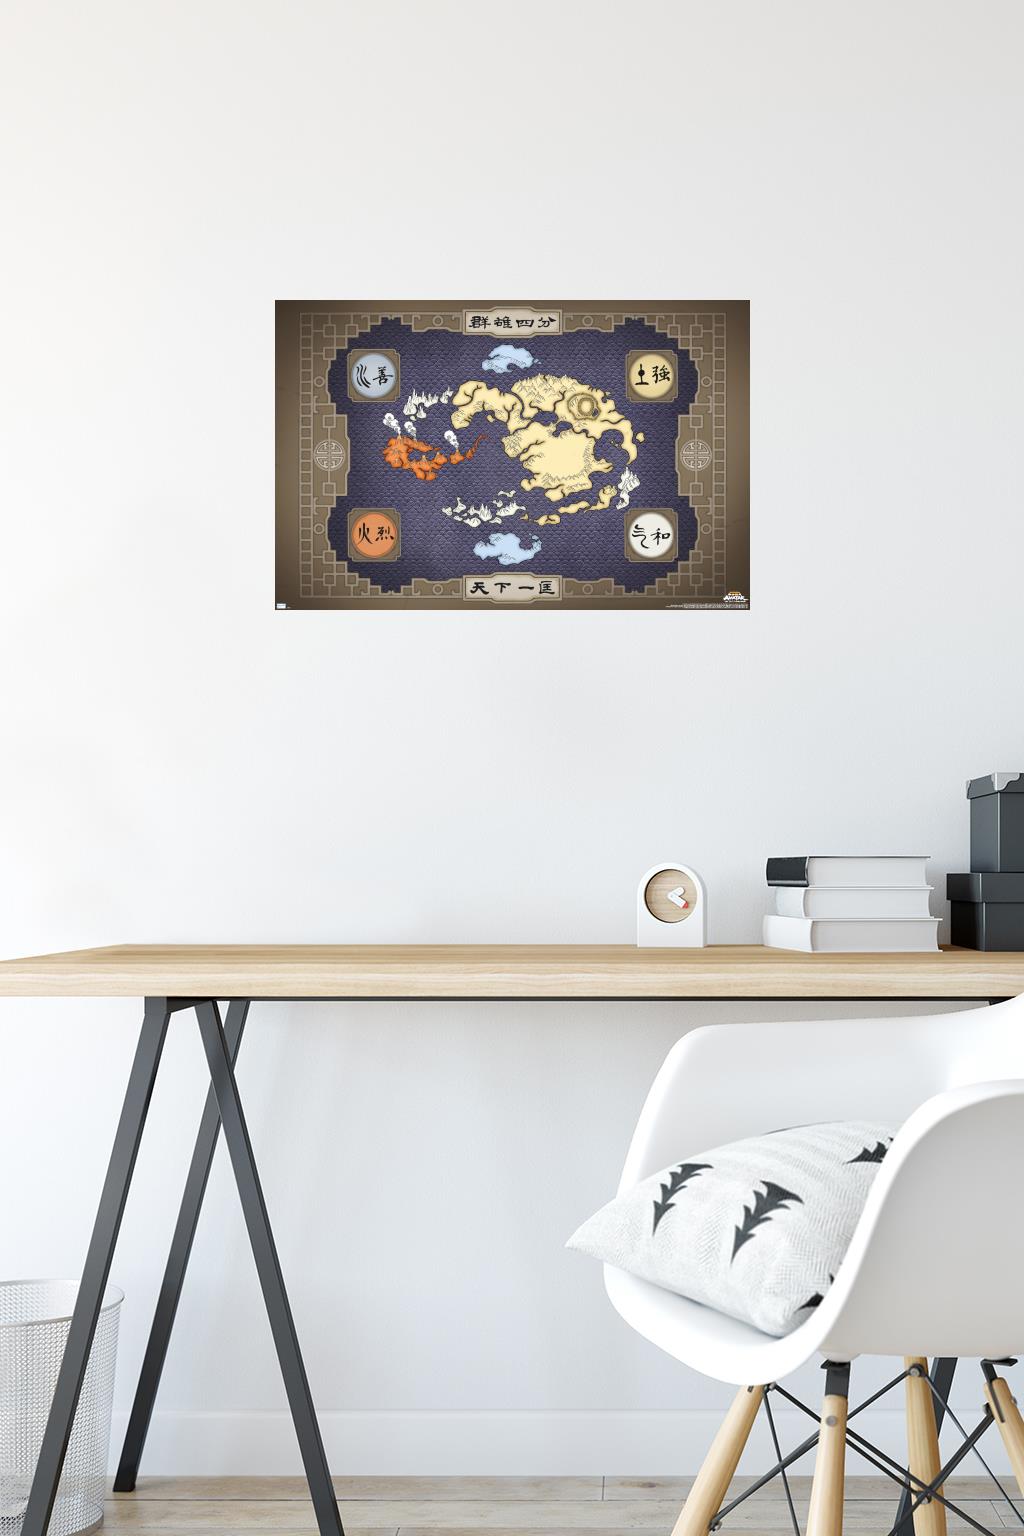 Avatar - Map Wall Poster, 14.725" x 22.375" - image 4 of 4